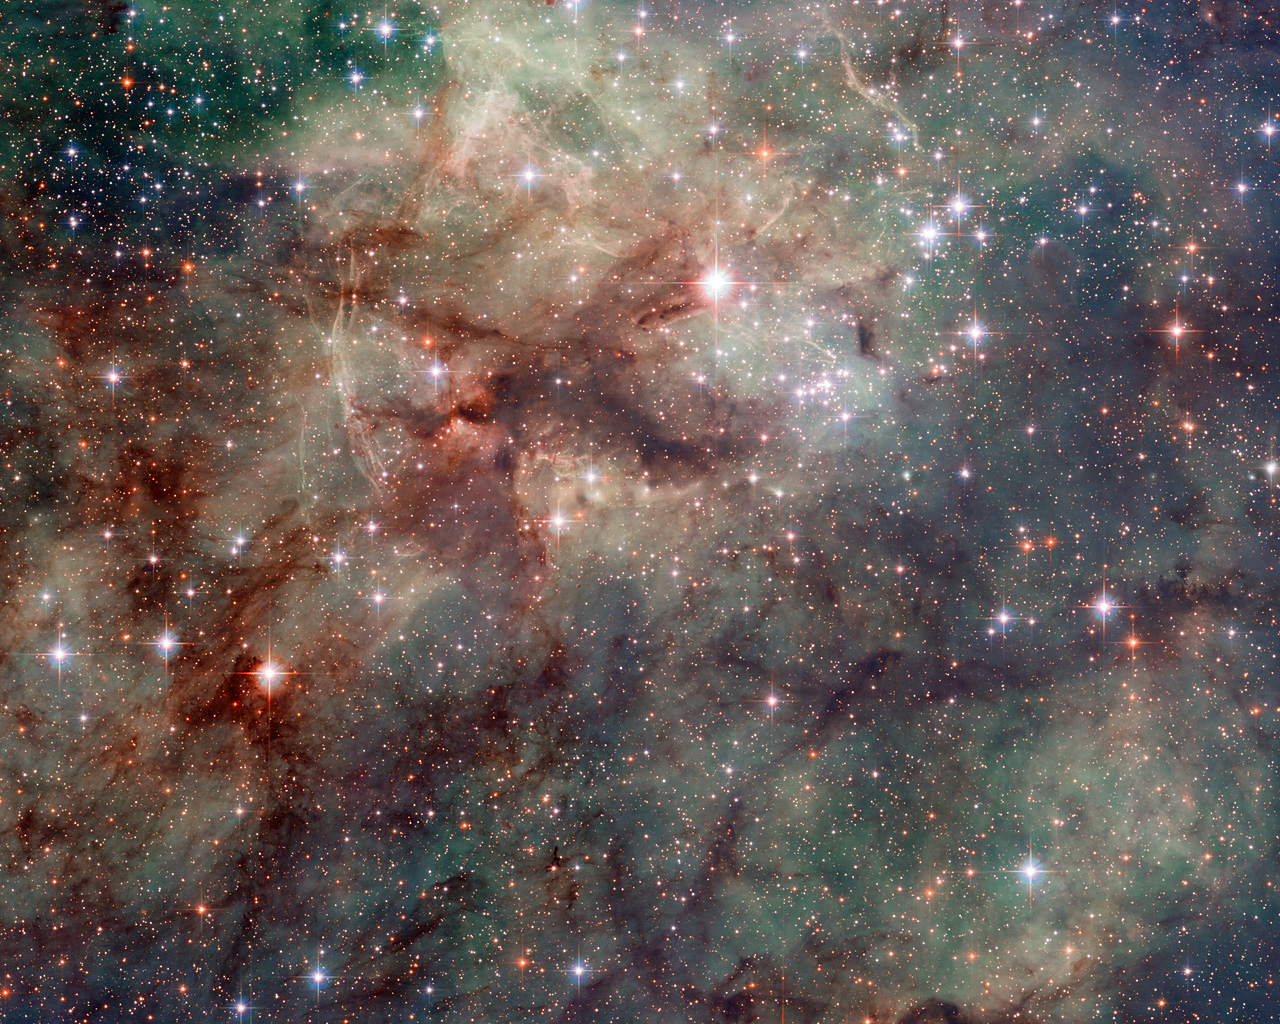 Hubble has taken this stunning close-up shot of part of the Tarantula Nebula. This star-forming region of ionised hydrogen gas is in the Large Magellanic Cloud, a small galaxy which neighbours the Milky Way. It is home to many extreme conditions including supernova remnants and the heaviest star ever found. The Tarantula Nebula is the most luminous nebula of its type  in the local Universe.